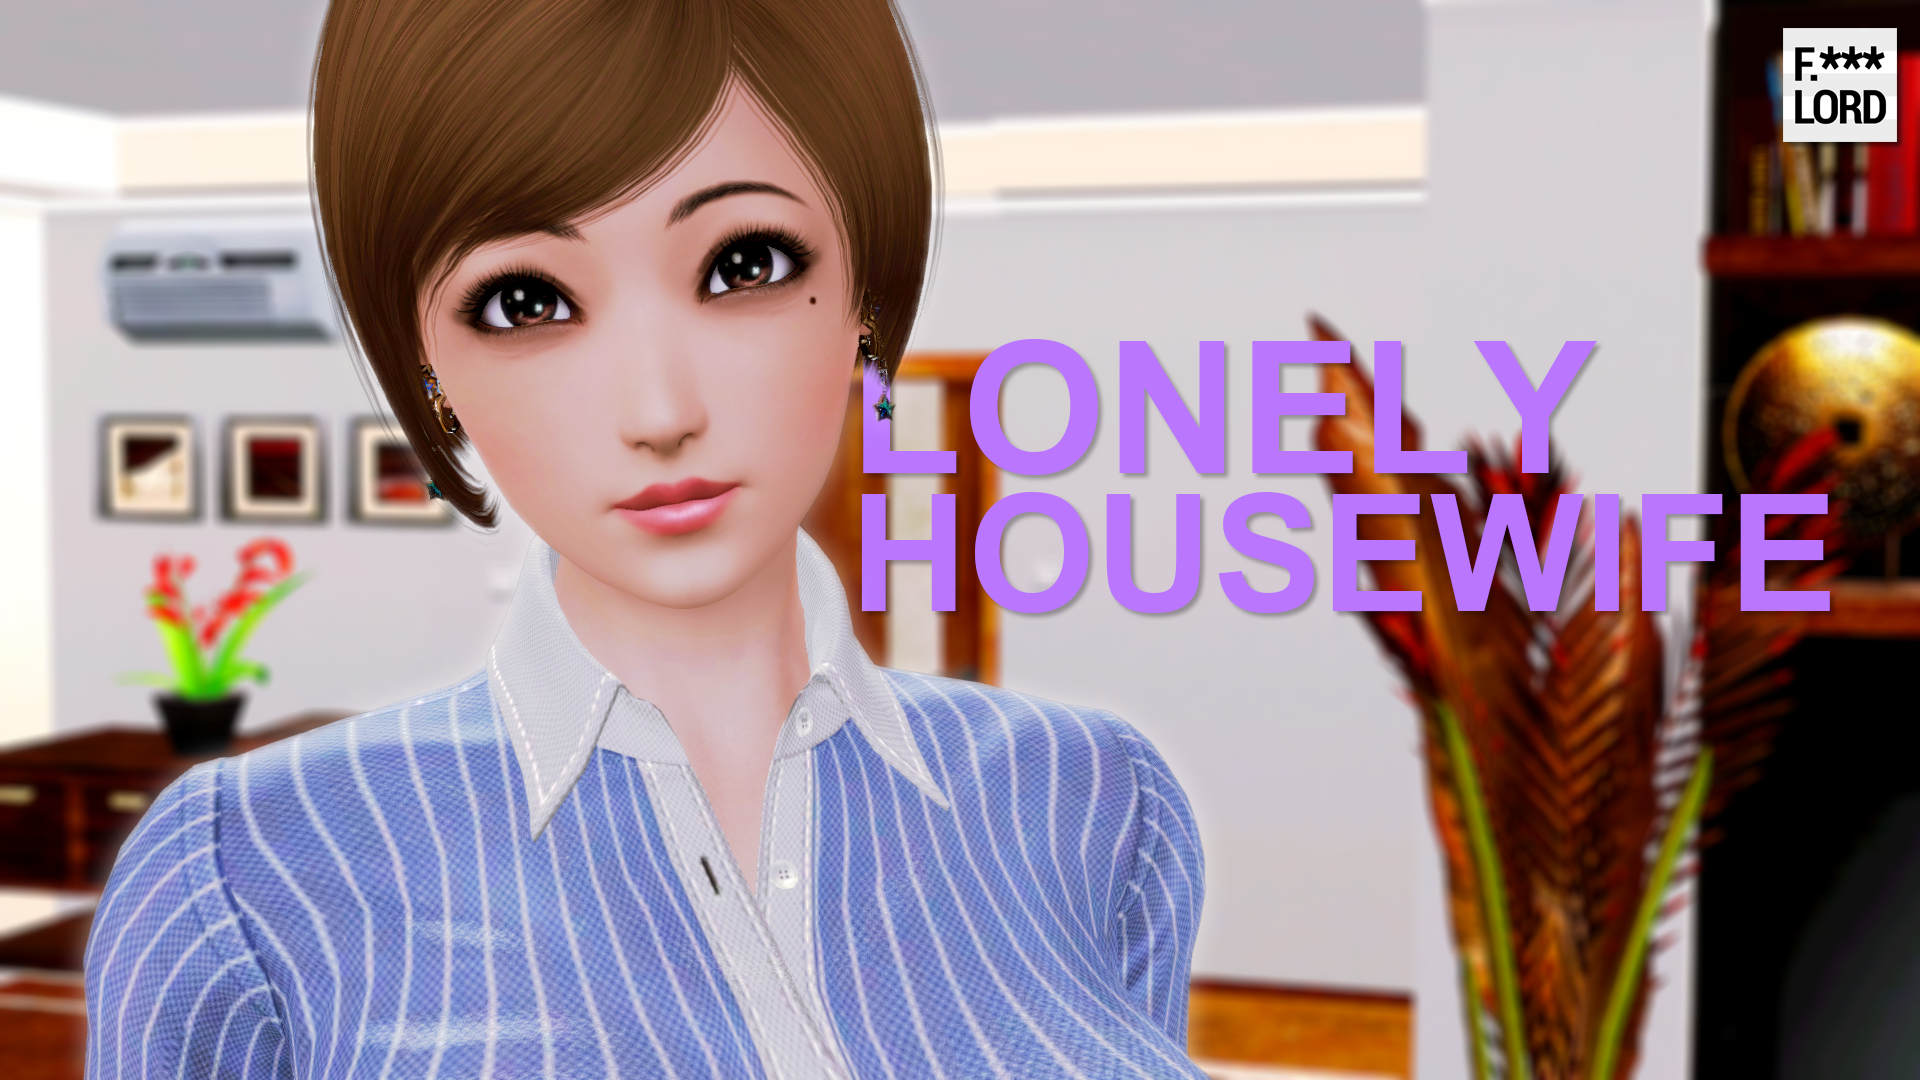 Lonely Housewife v1.0.0 COMPLETED - free game download, reviews, mega photo